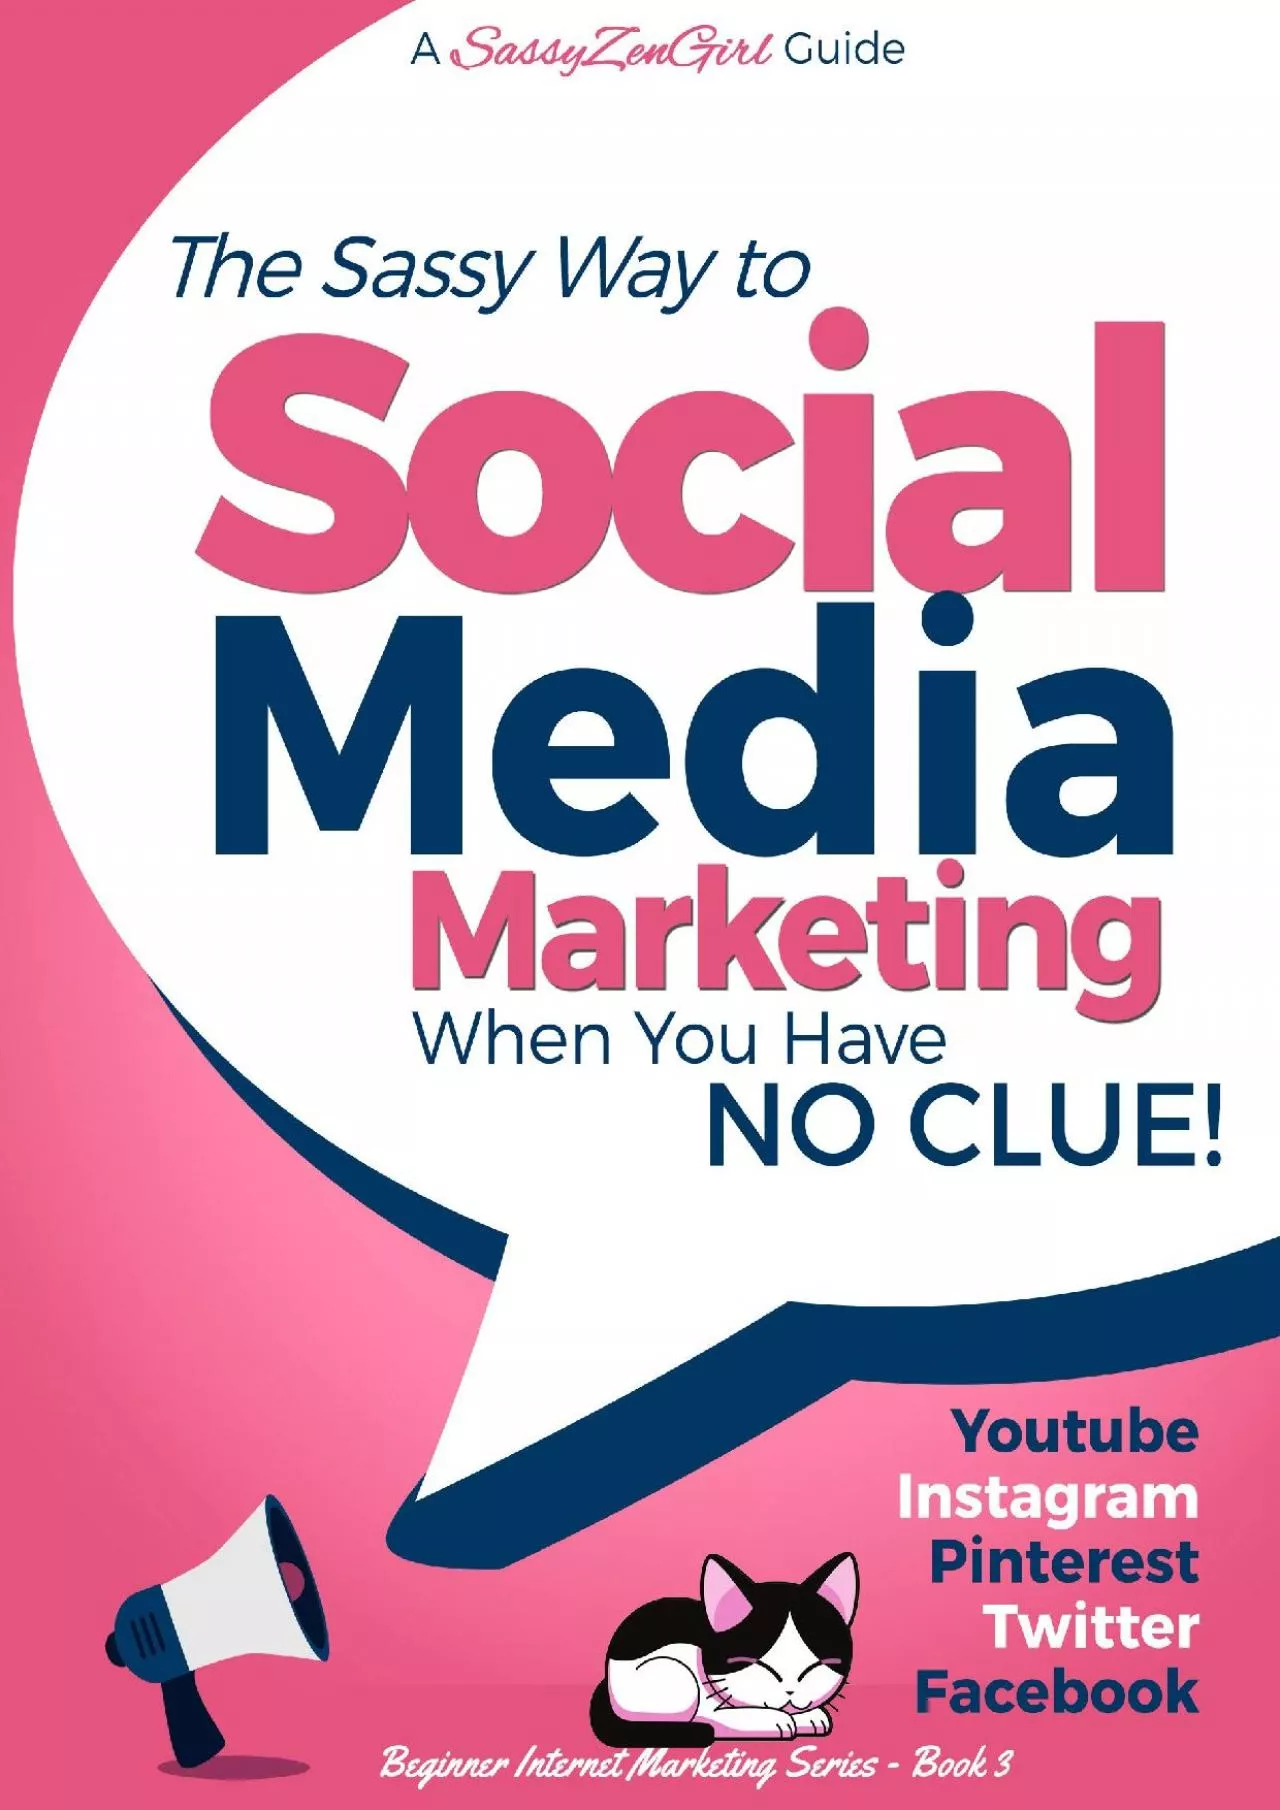 Social Media Marketing when you have NO CLUE: Youtube, Instagram, Pinterest, Twitter,